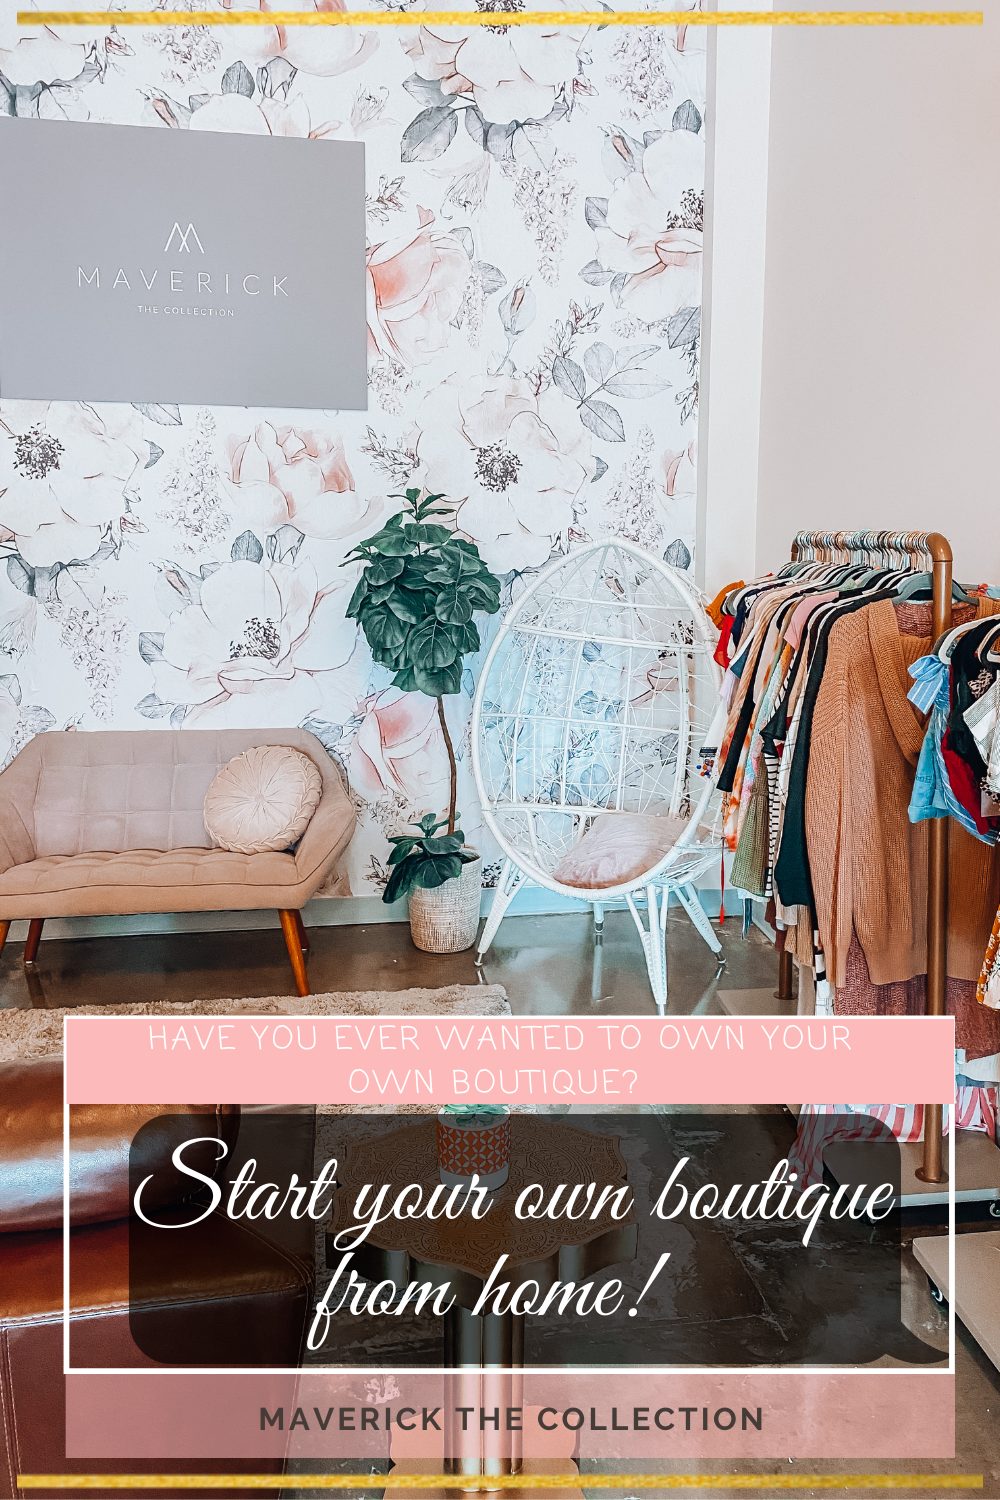 Own your own boutique right from home! 